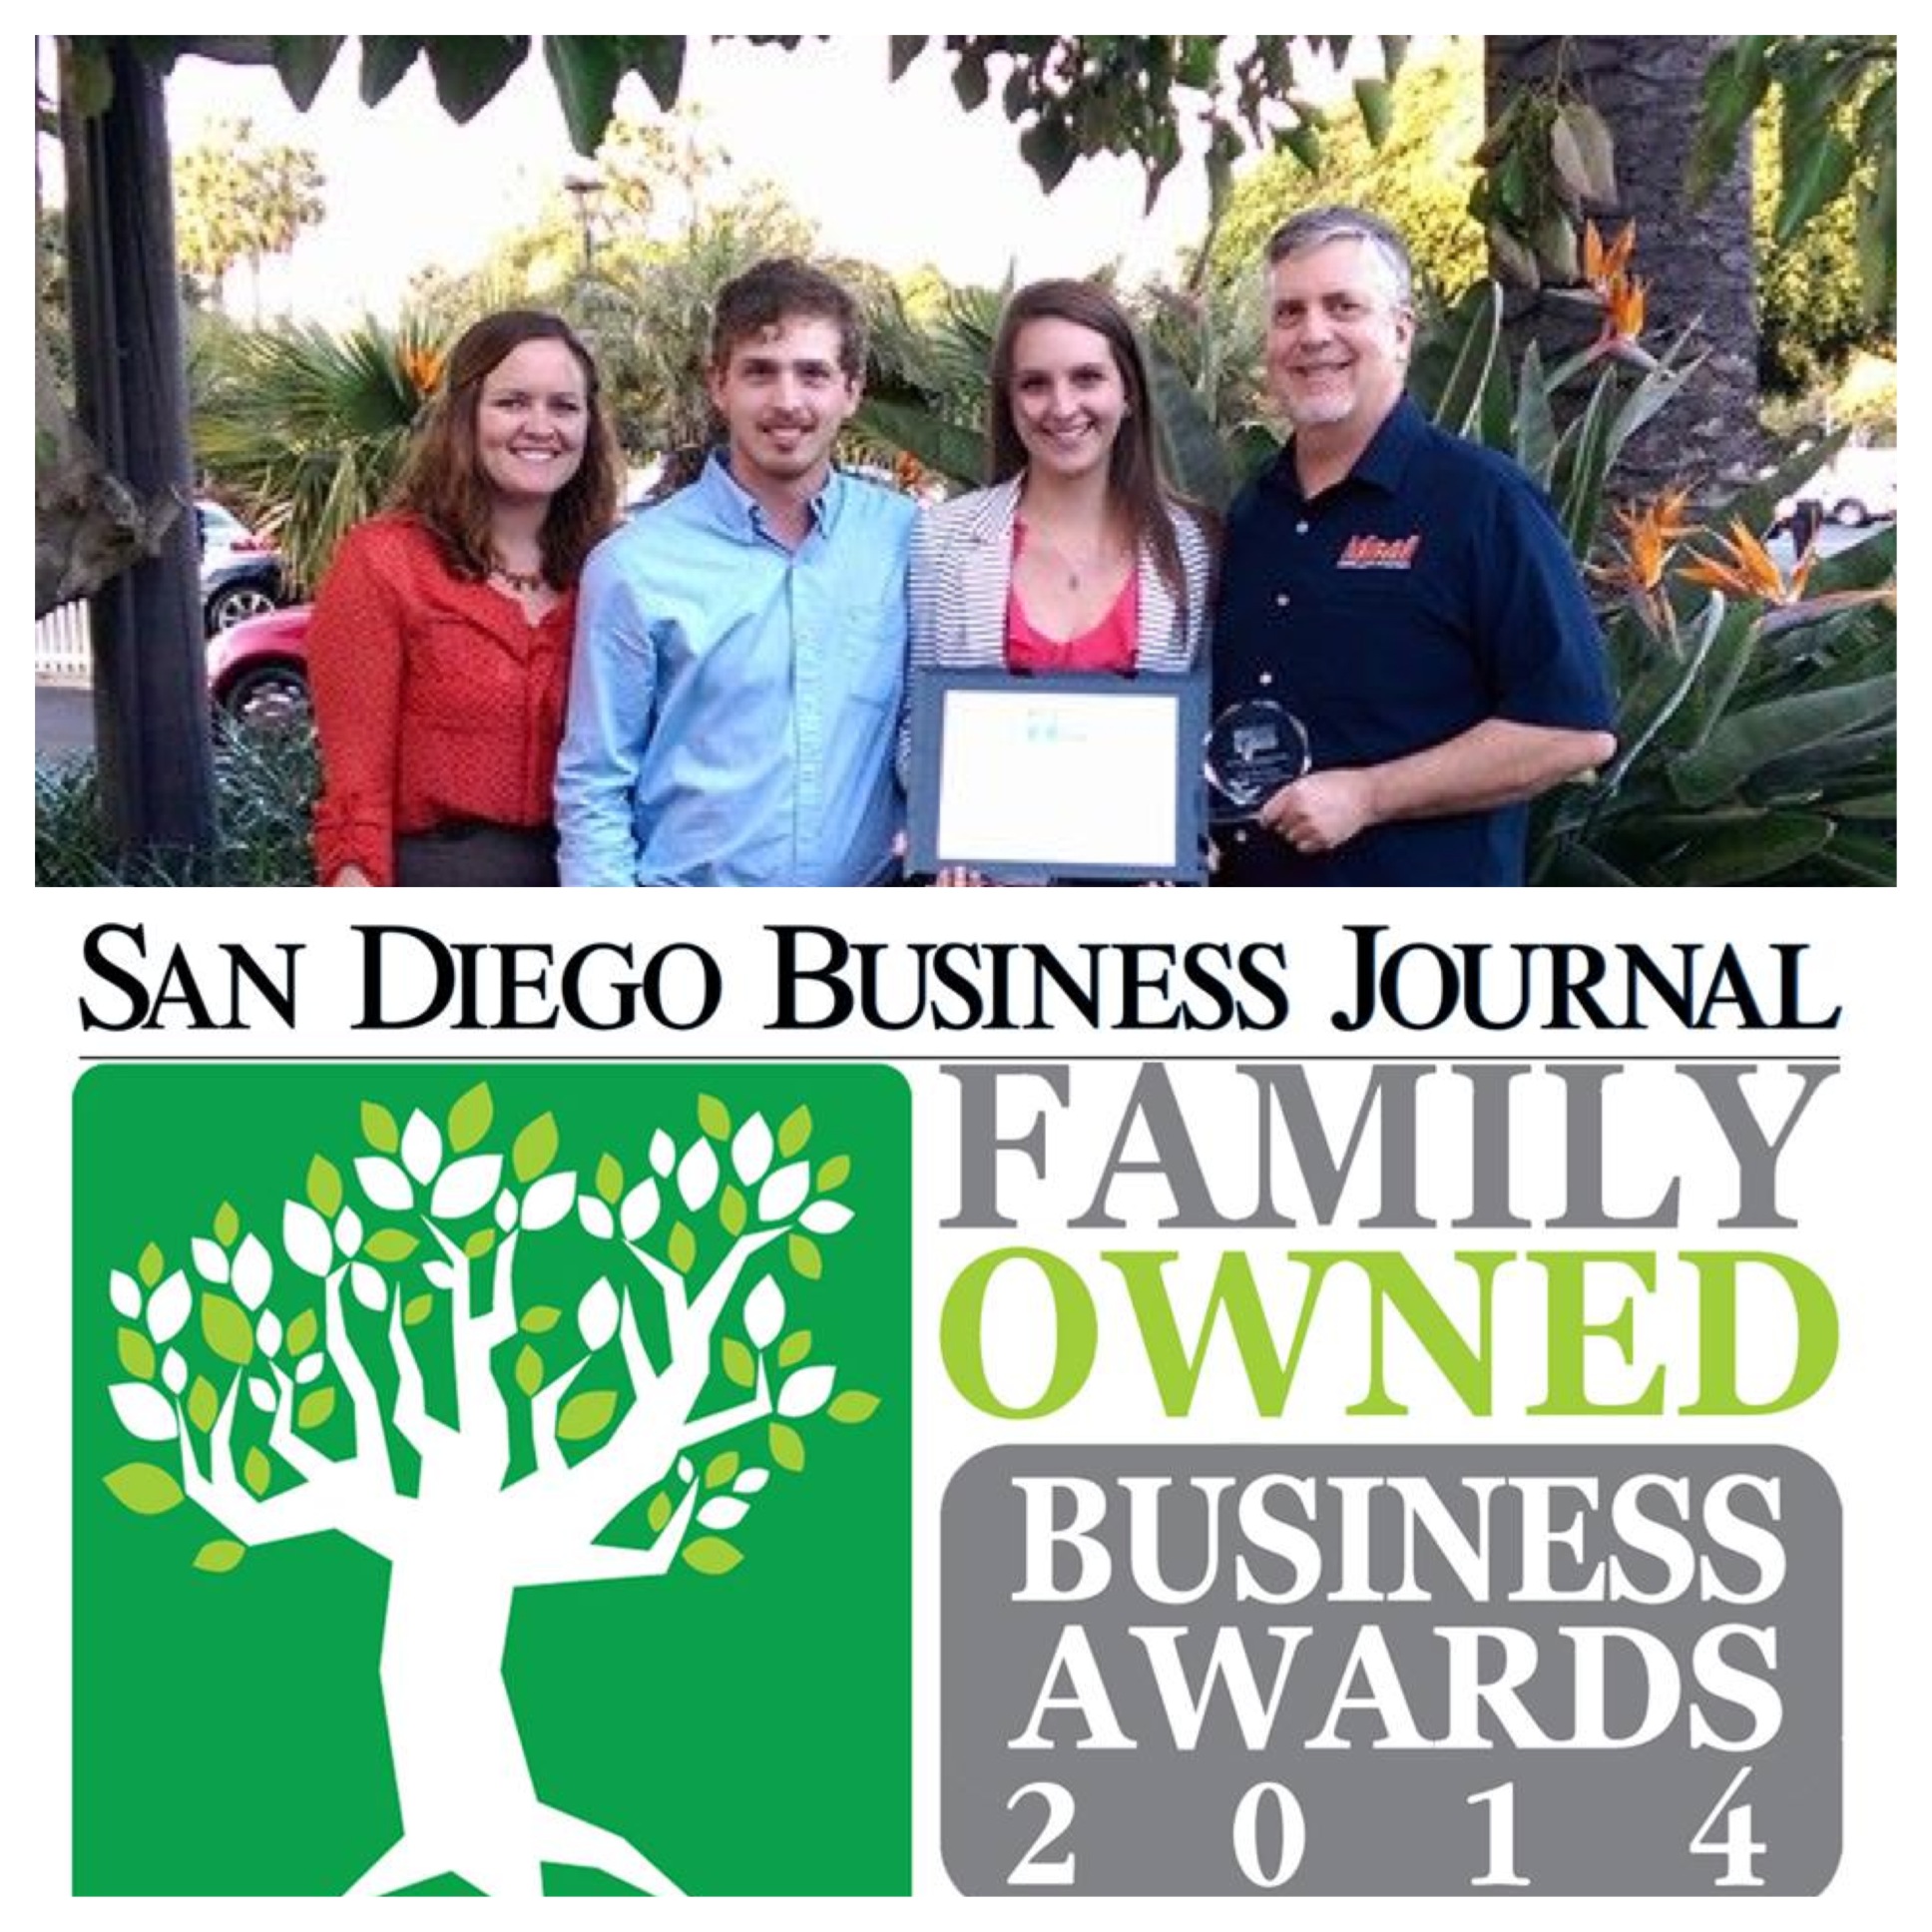 San Diego Business Journal Family Owned Business Awards